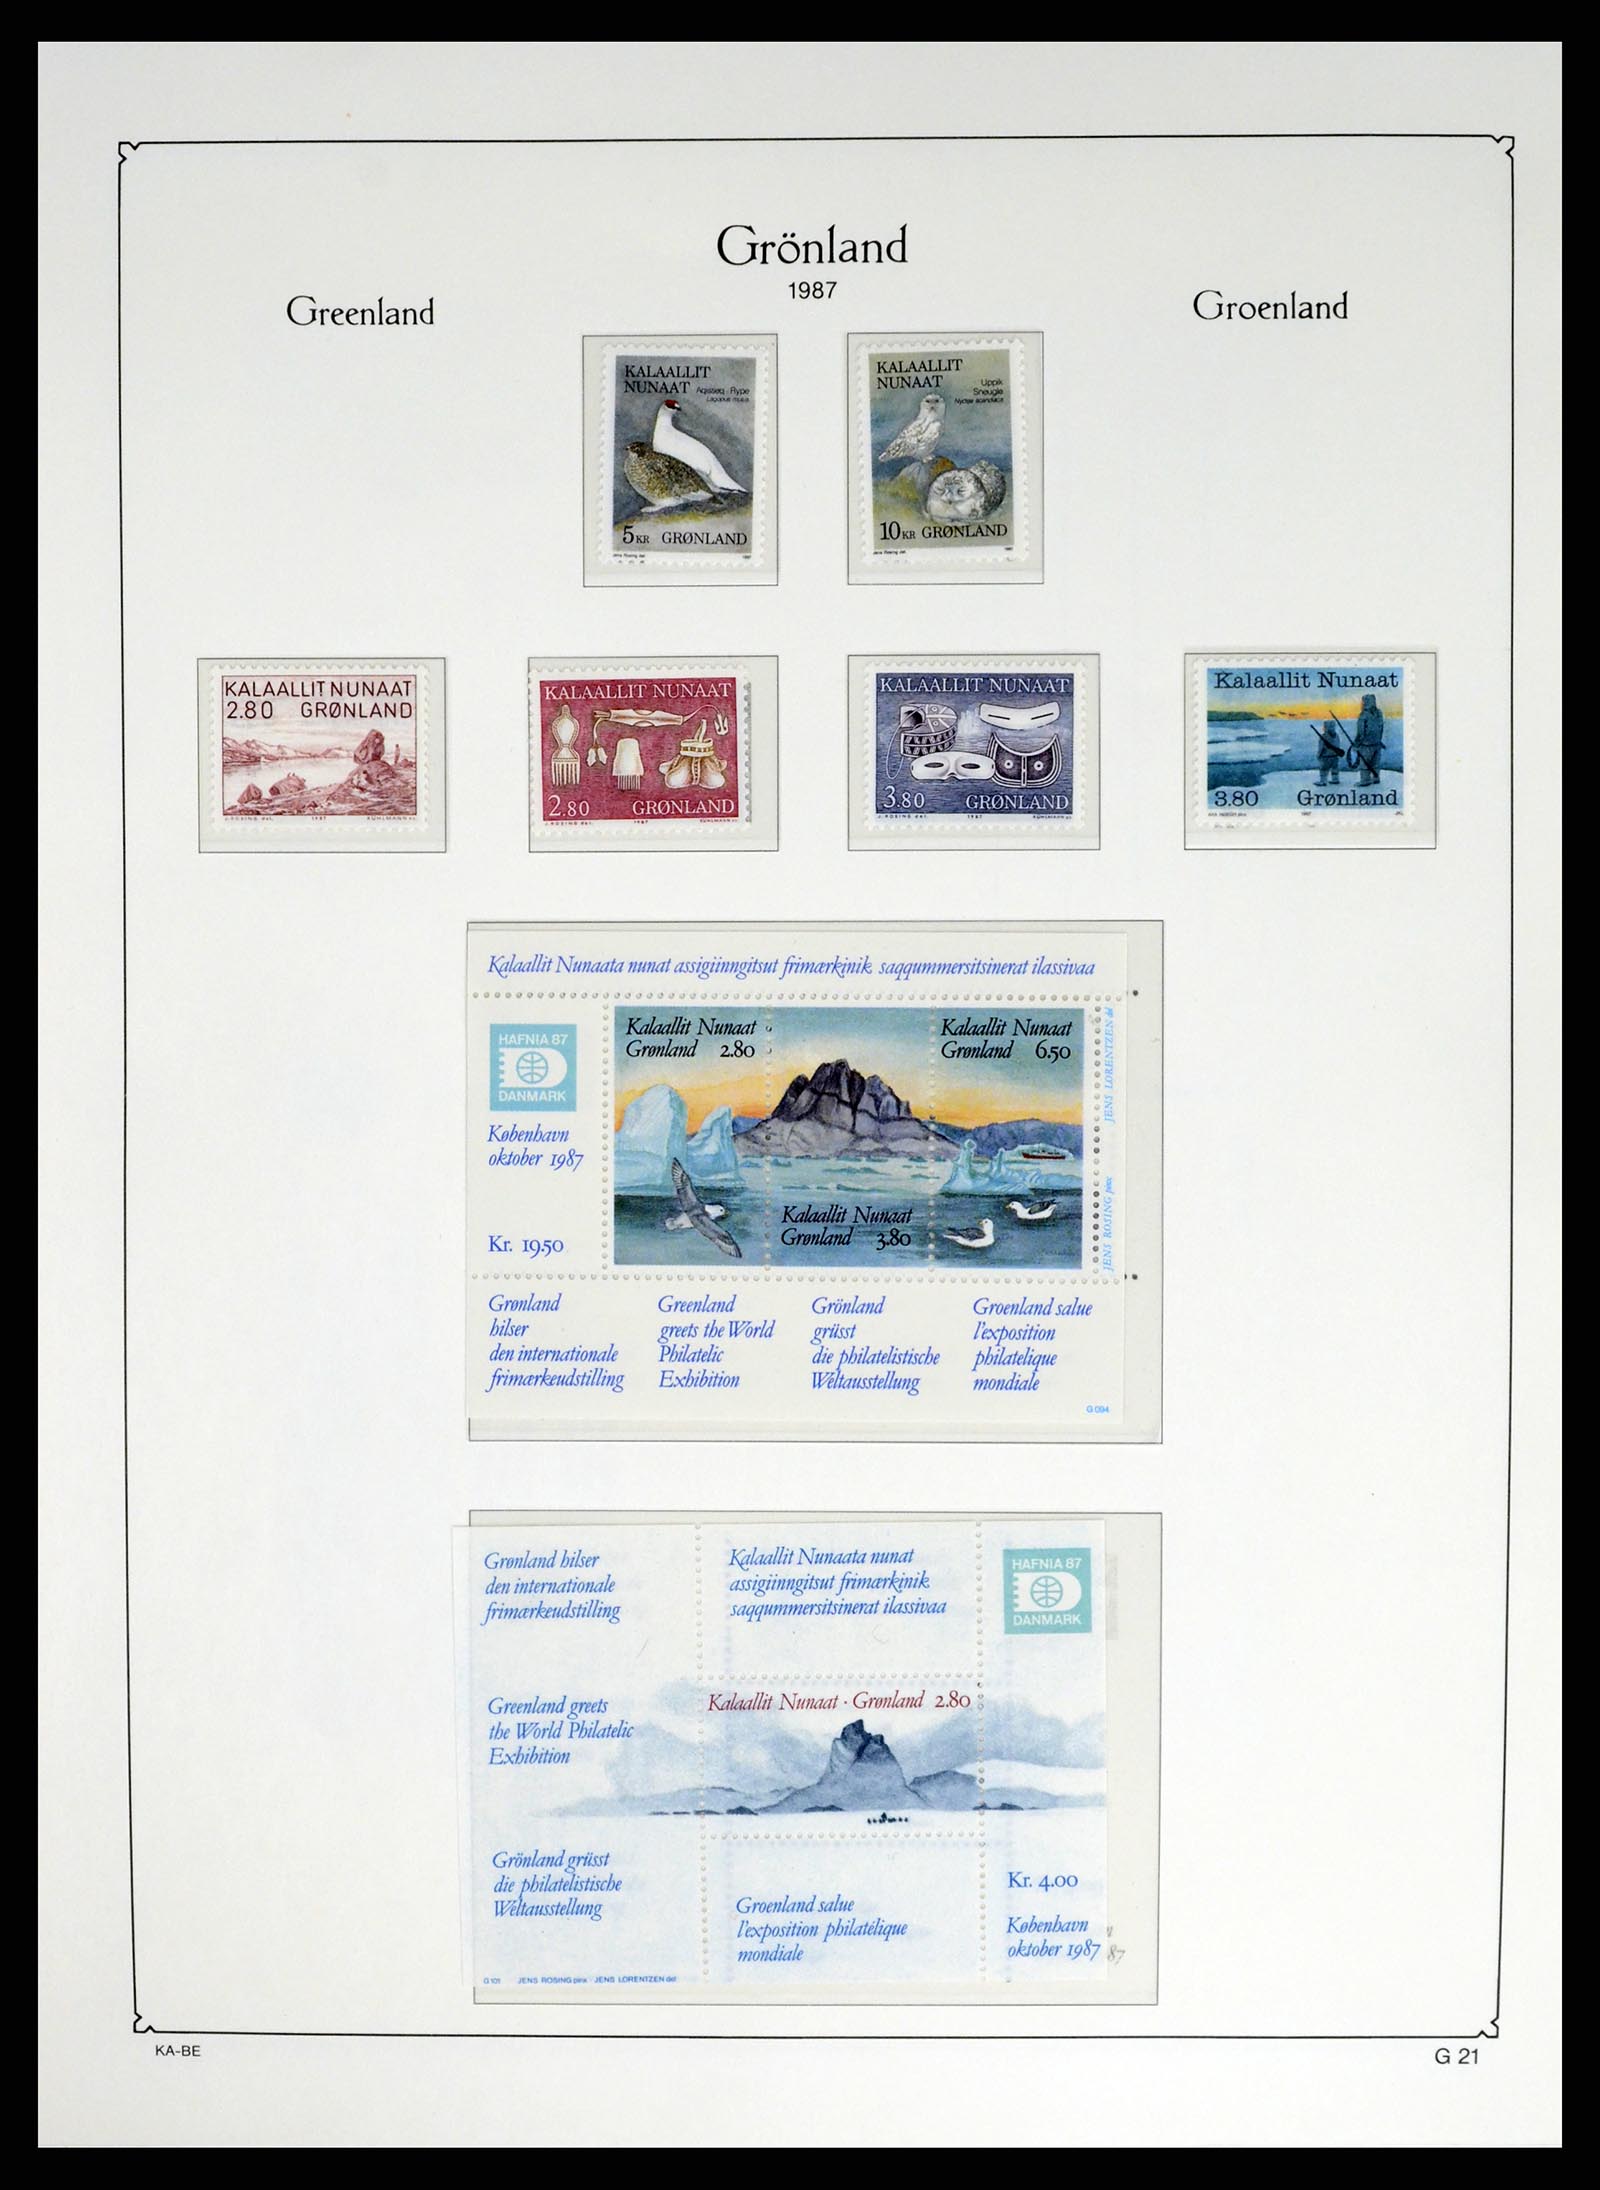 37405 029 - Stamp collection 37405 Greenland 1905-2014.